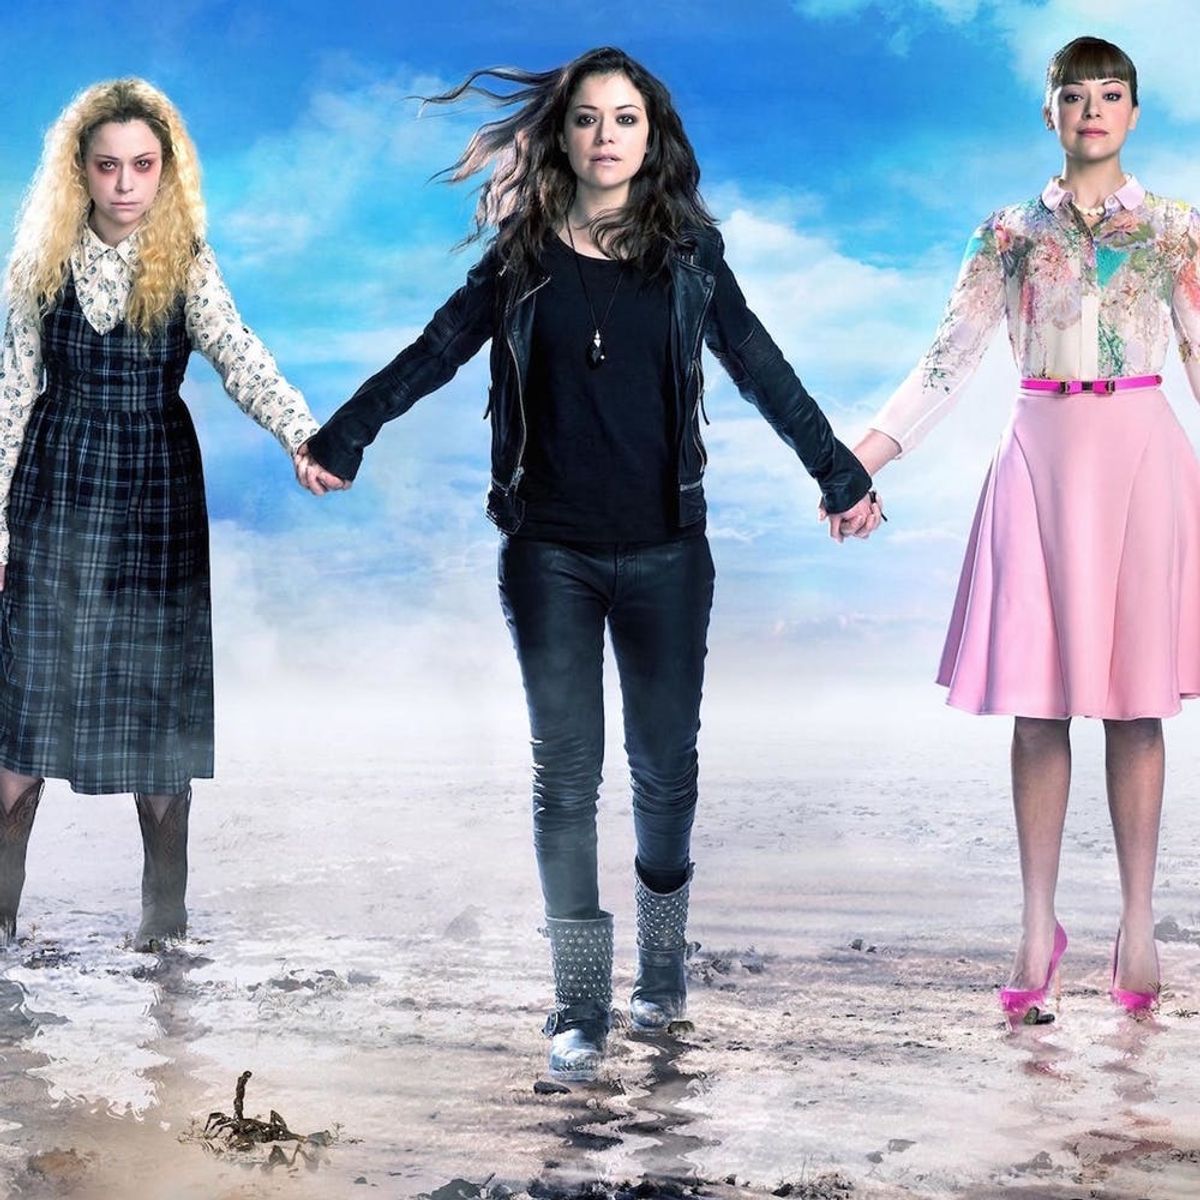 5 Shows to Stream Immediately After the Orphan Black Finale